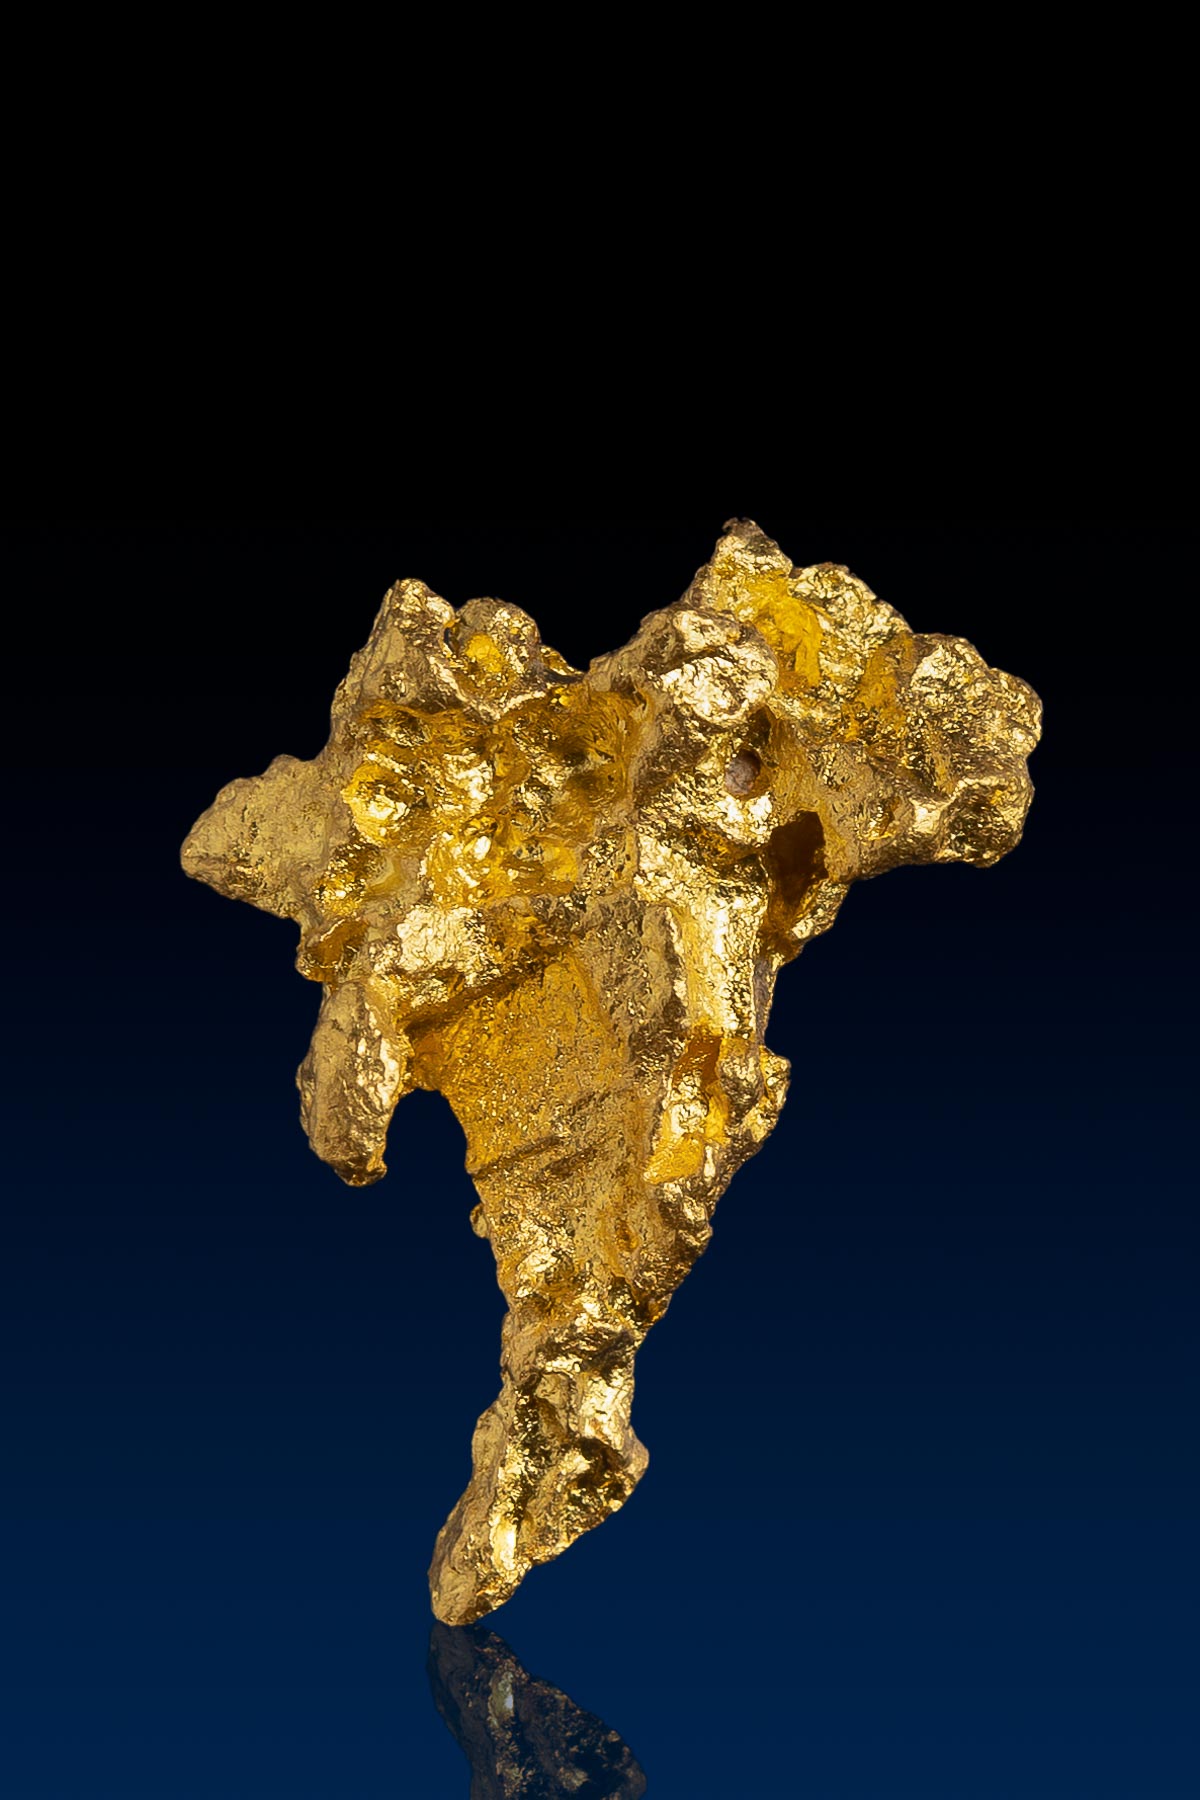 Tall Pointed Australian Natural Gold Nugget - 2.33 grams